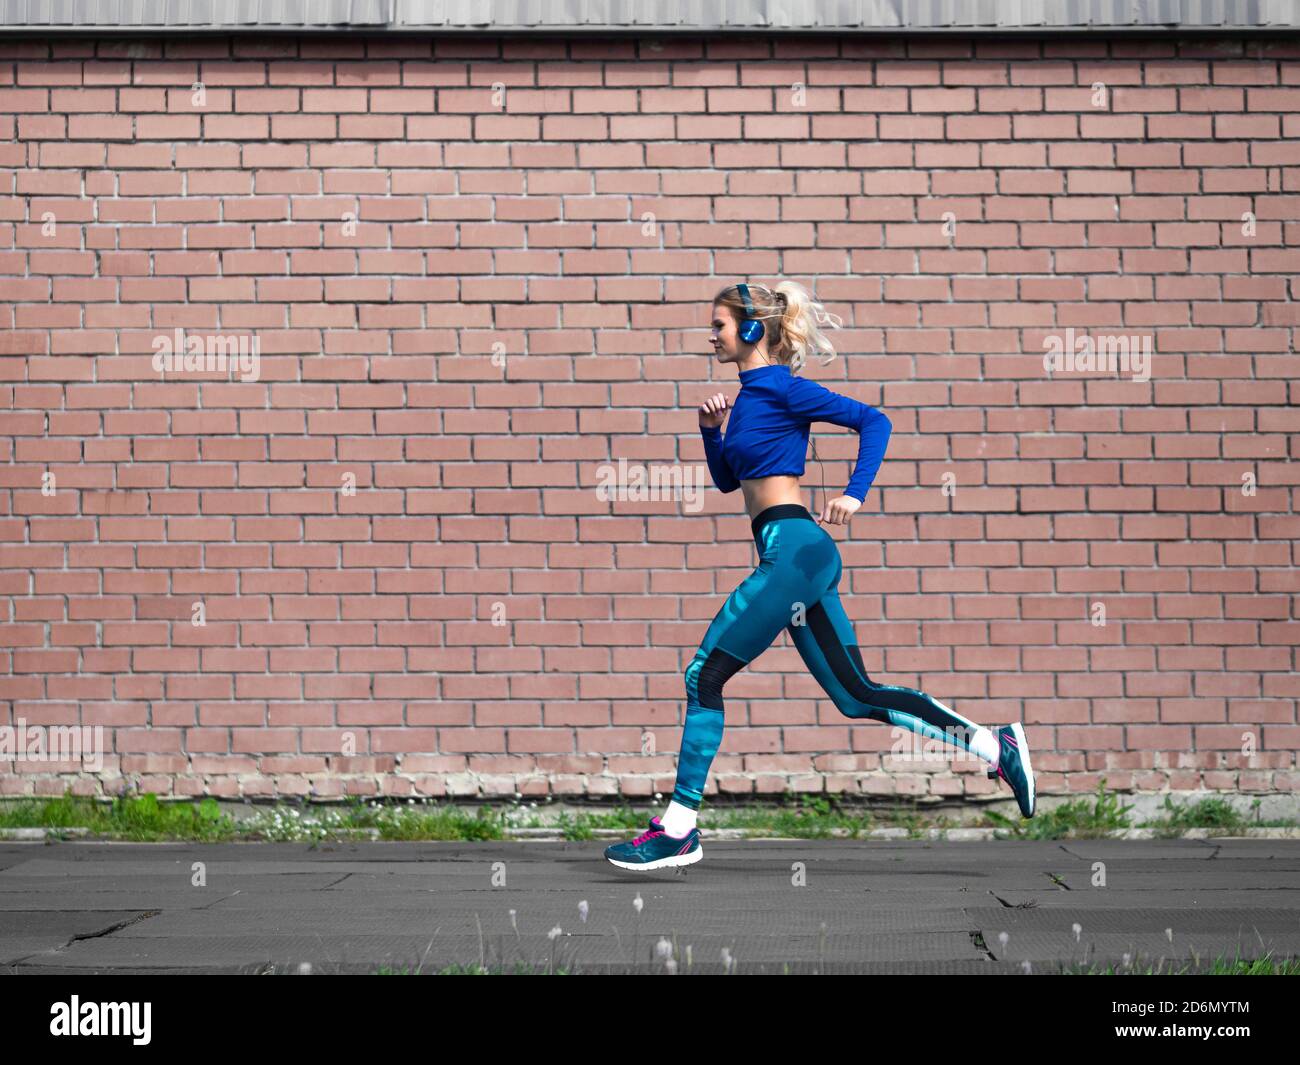 Woman jogging outdoor in a sunny day. Sport and healthy lifestyle concept. Brick wall background. Stock Photo